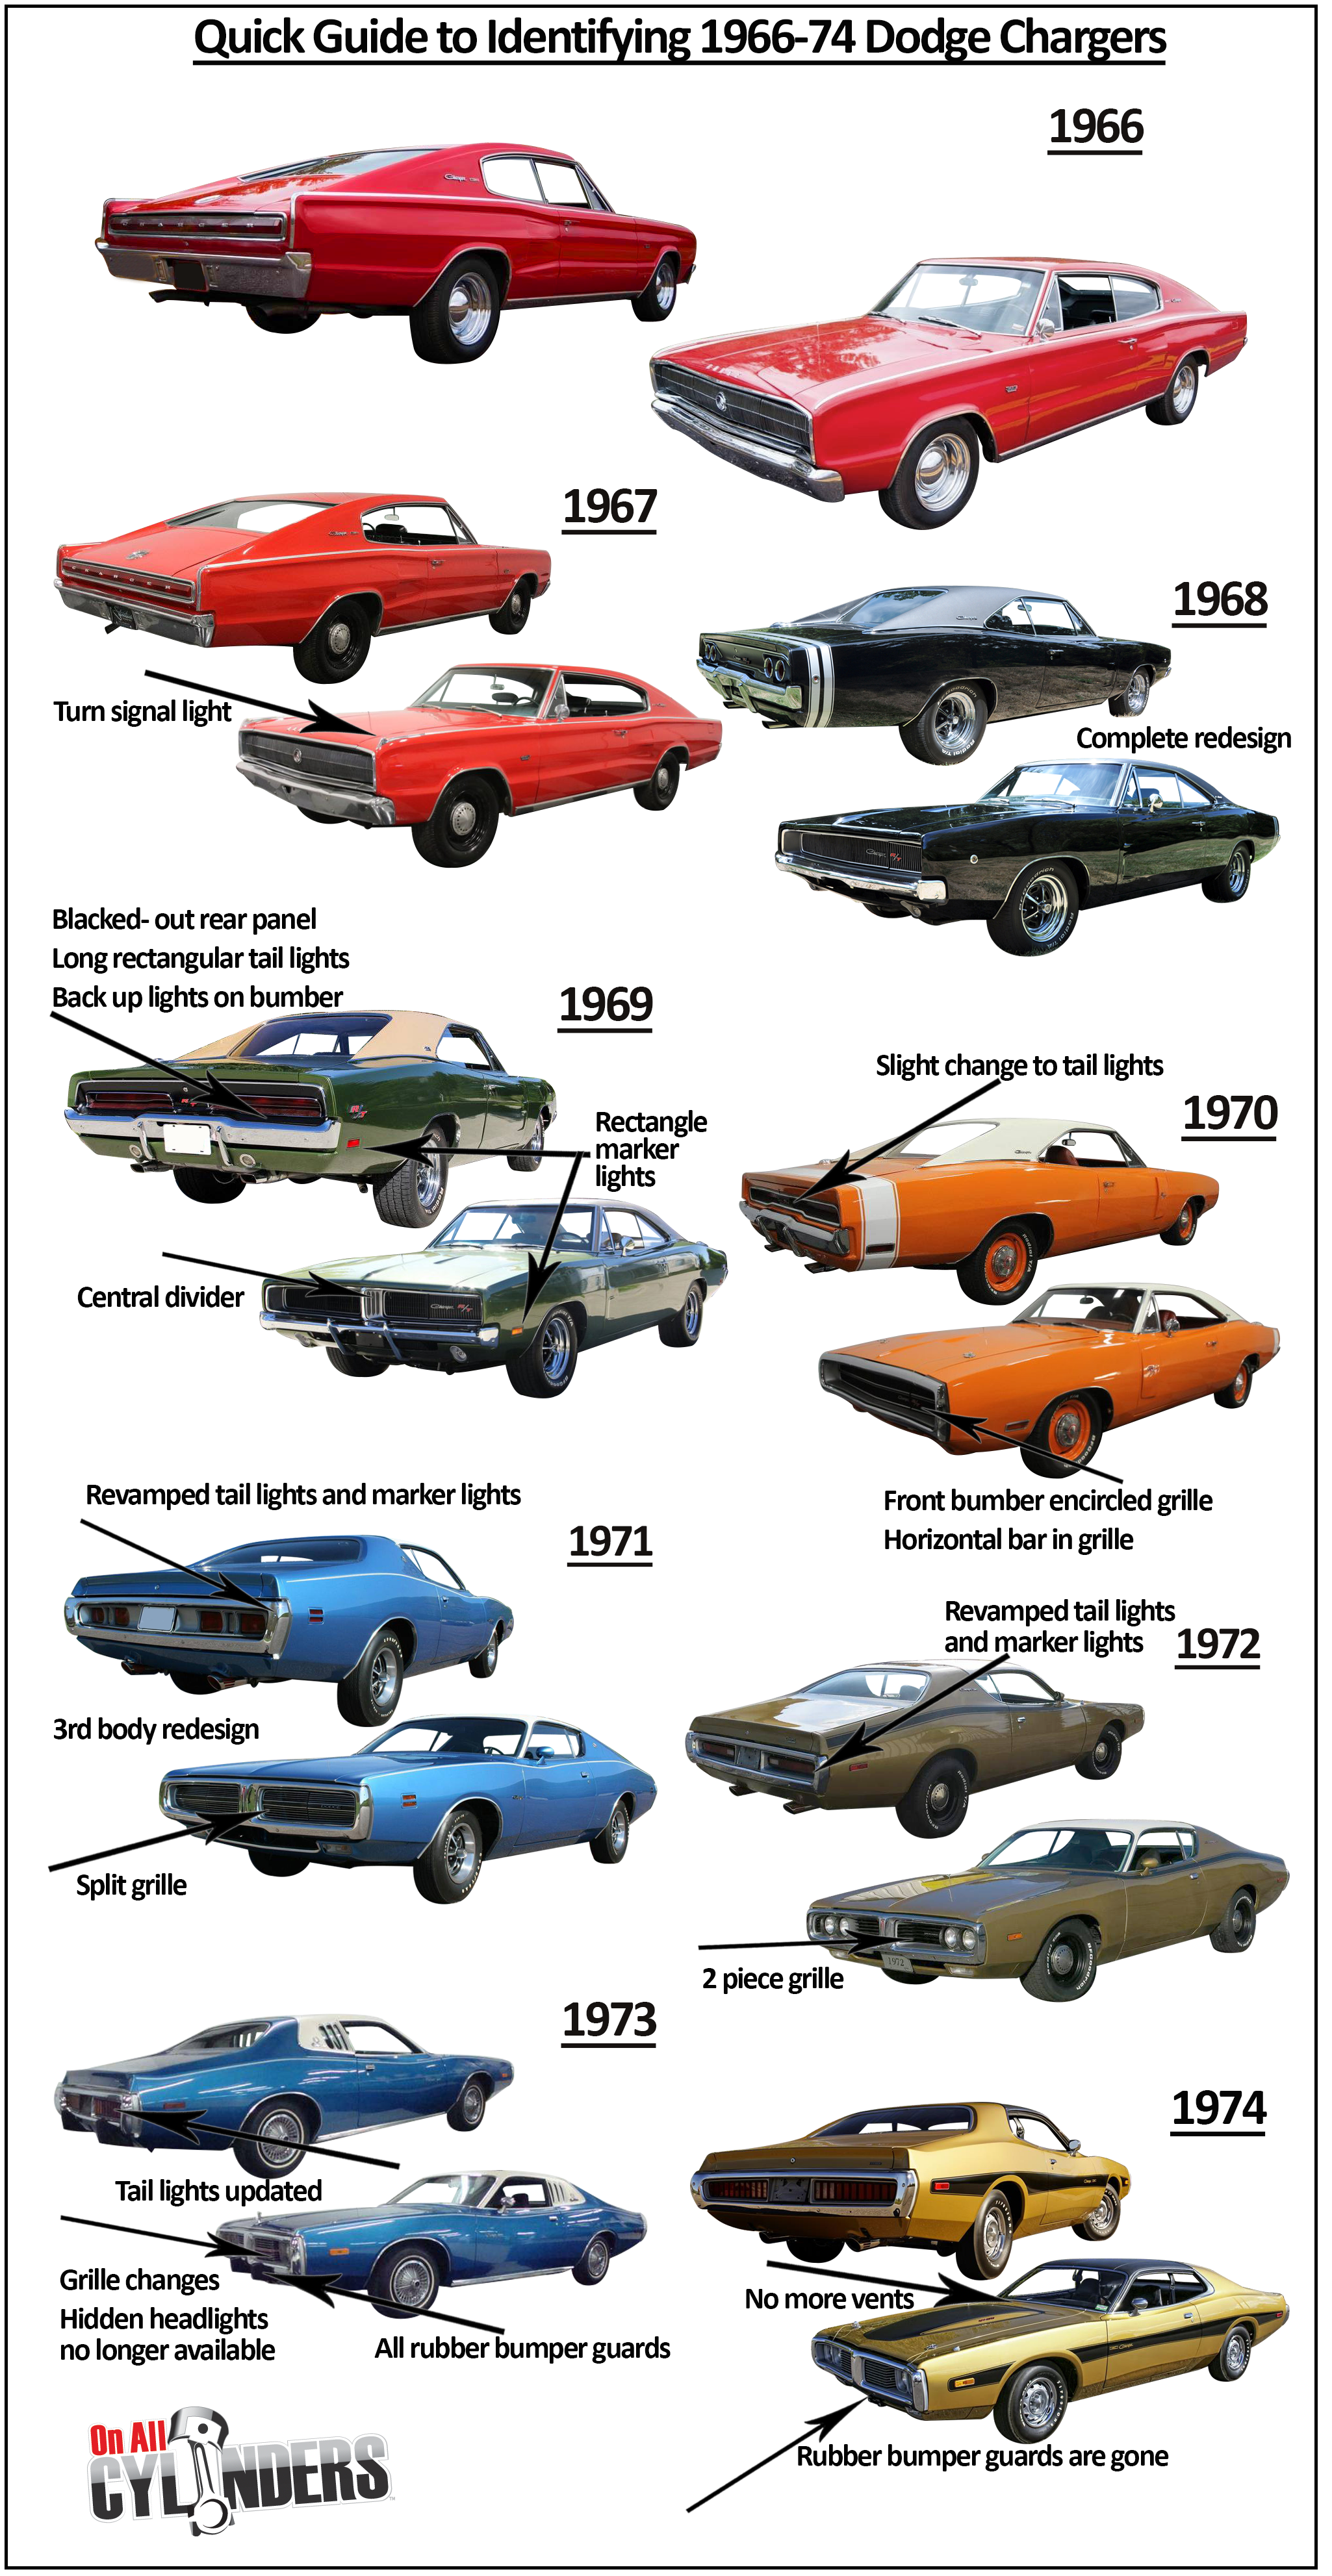 dodge early models Ride Guides: A Quick Guide to Identifying Early Dodge Chargers